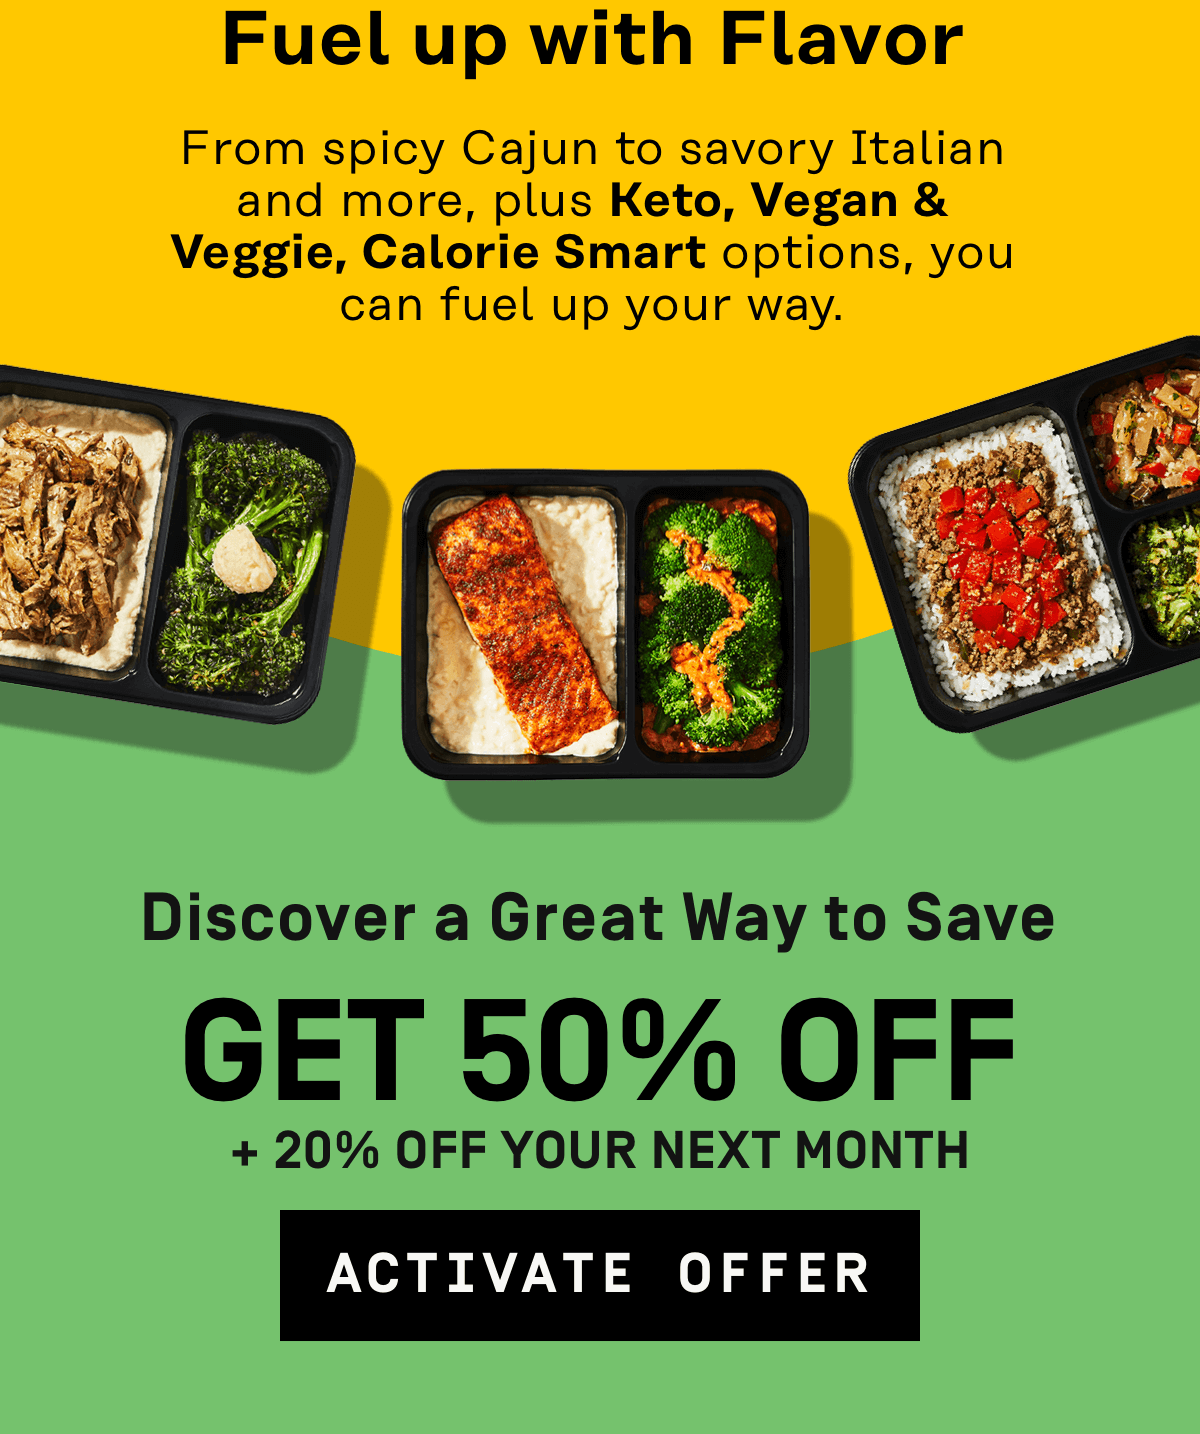 Discover a great way to save 50% Off + 20% Off Your Next Month | Activate Offer